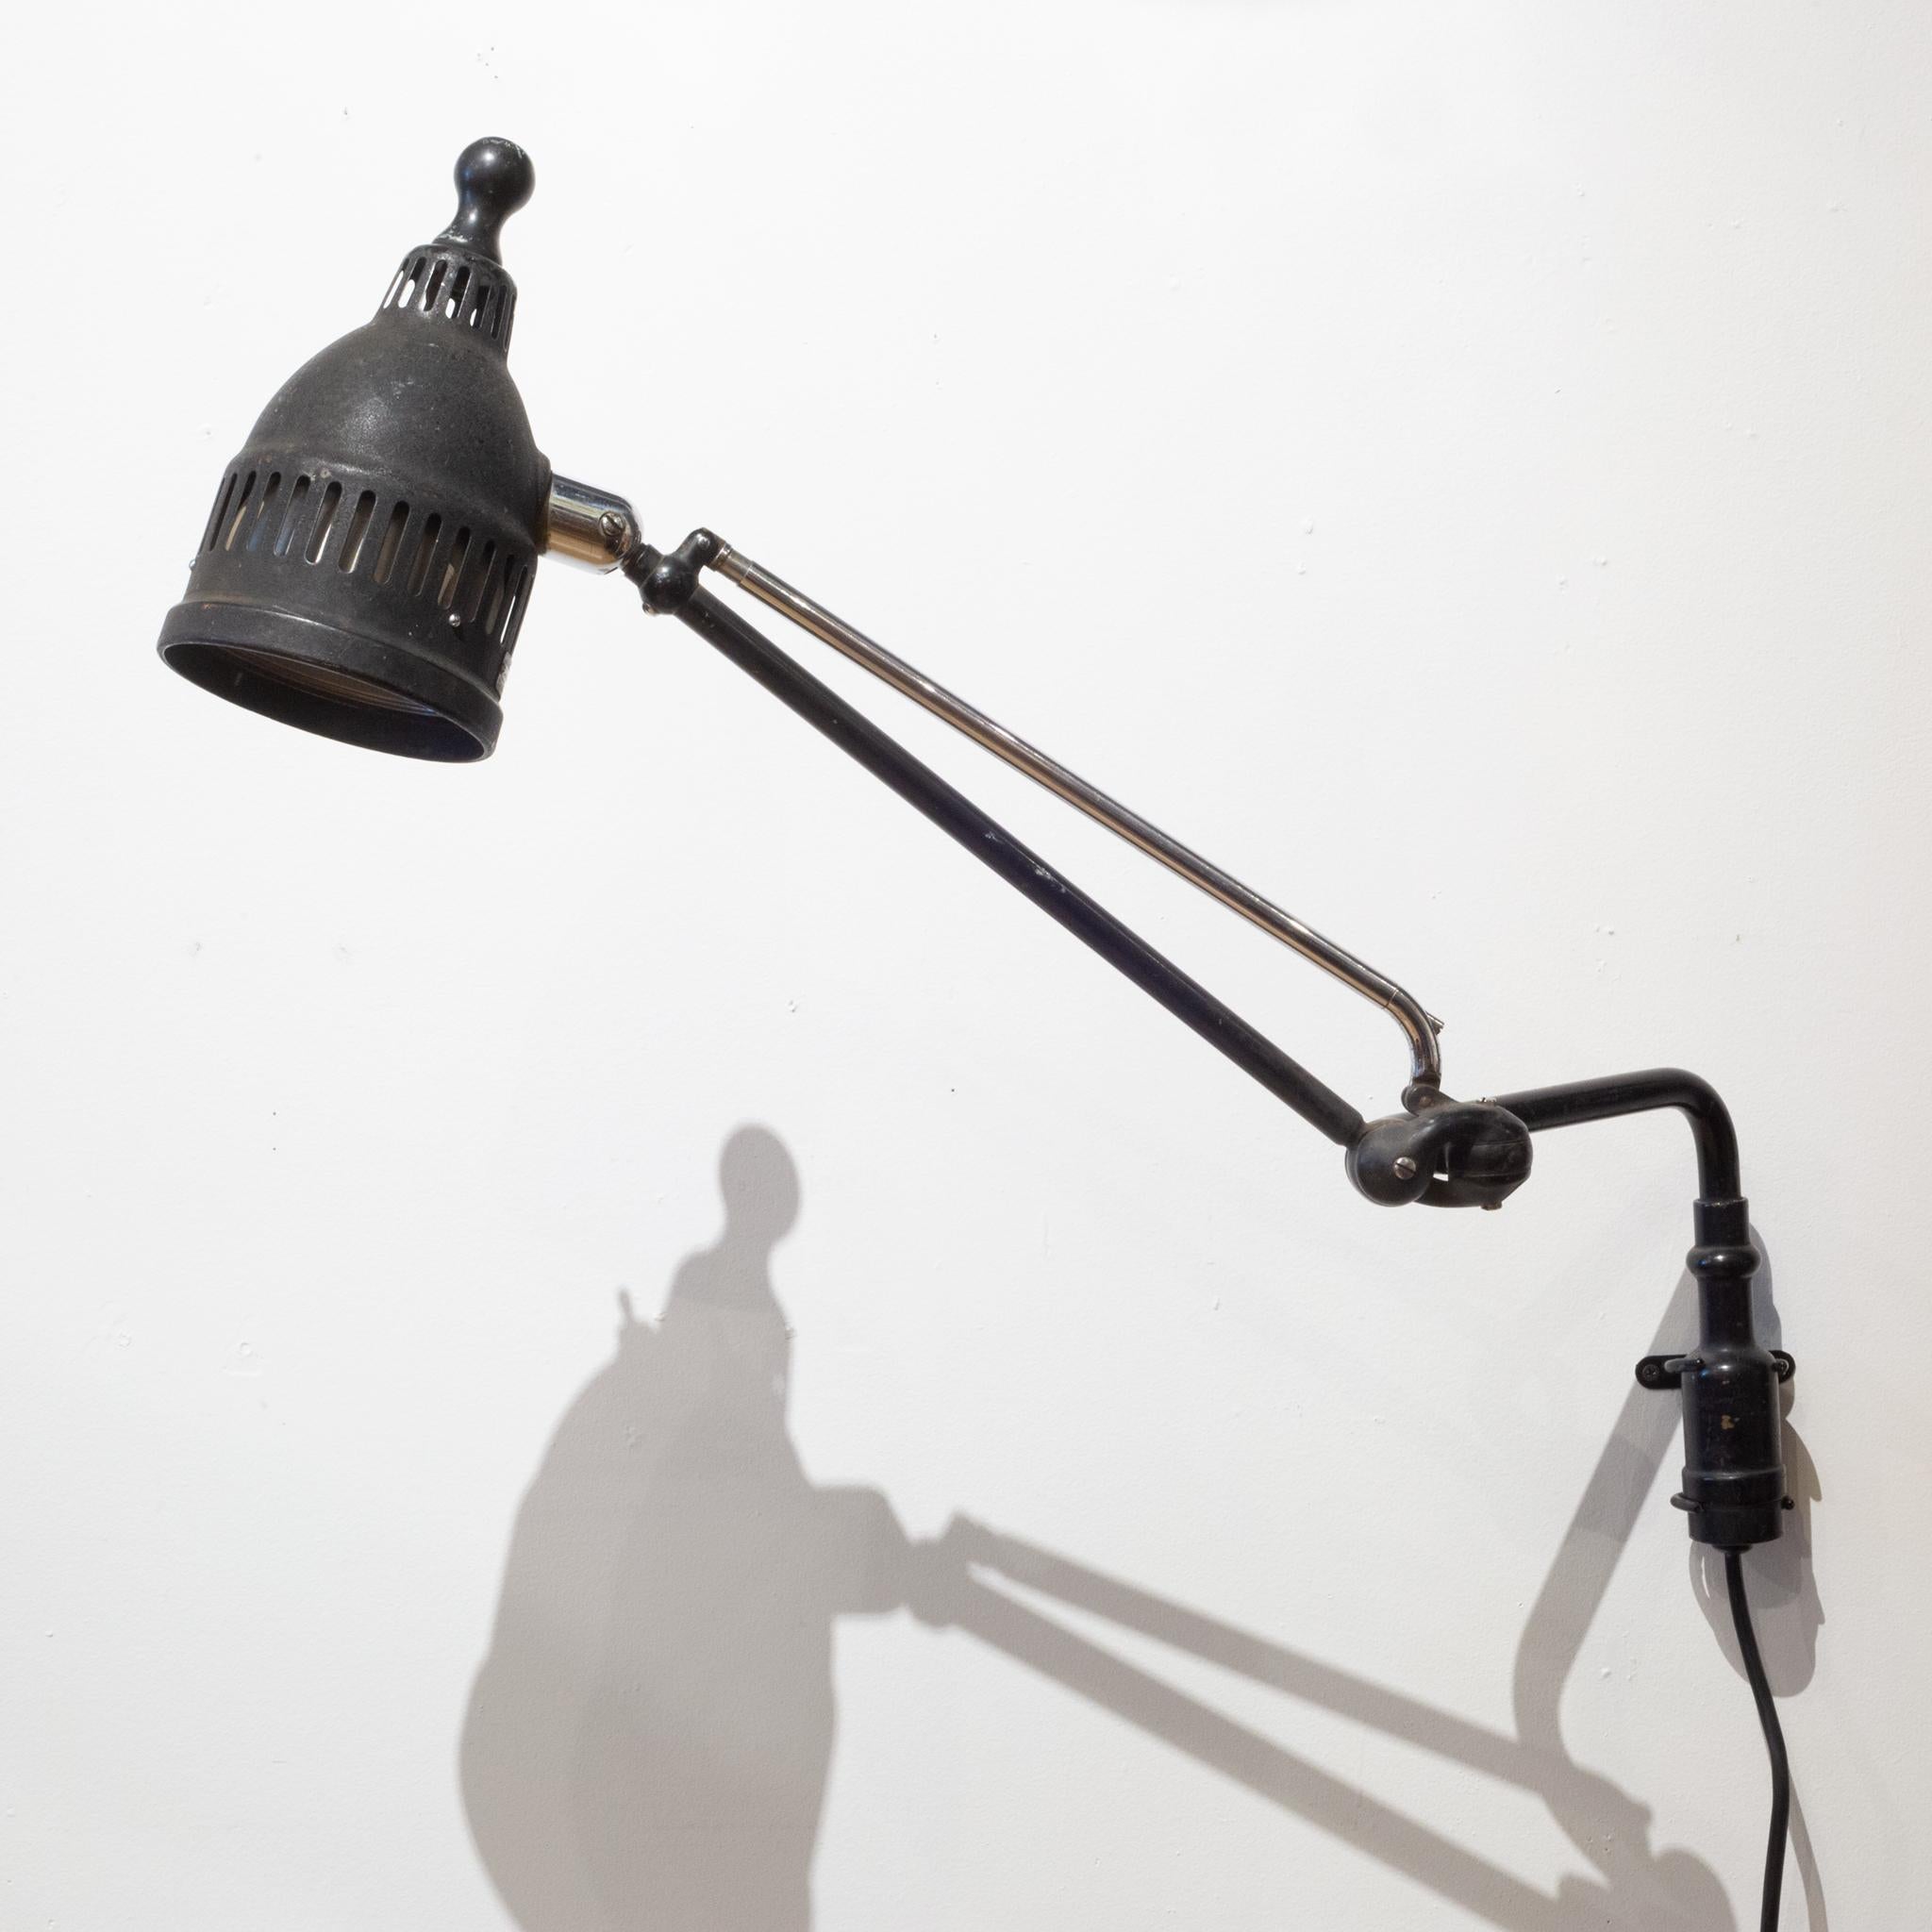 About

An original articulating Ritter Dualite dental light with metal shade and chrome and metal arm. The shade is metal with a wooden handle. The light swivels at the base and adjusts on the arm and shade. A custom steel wall mount has been